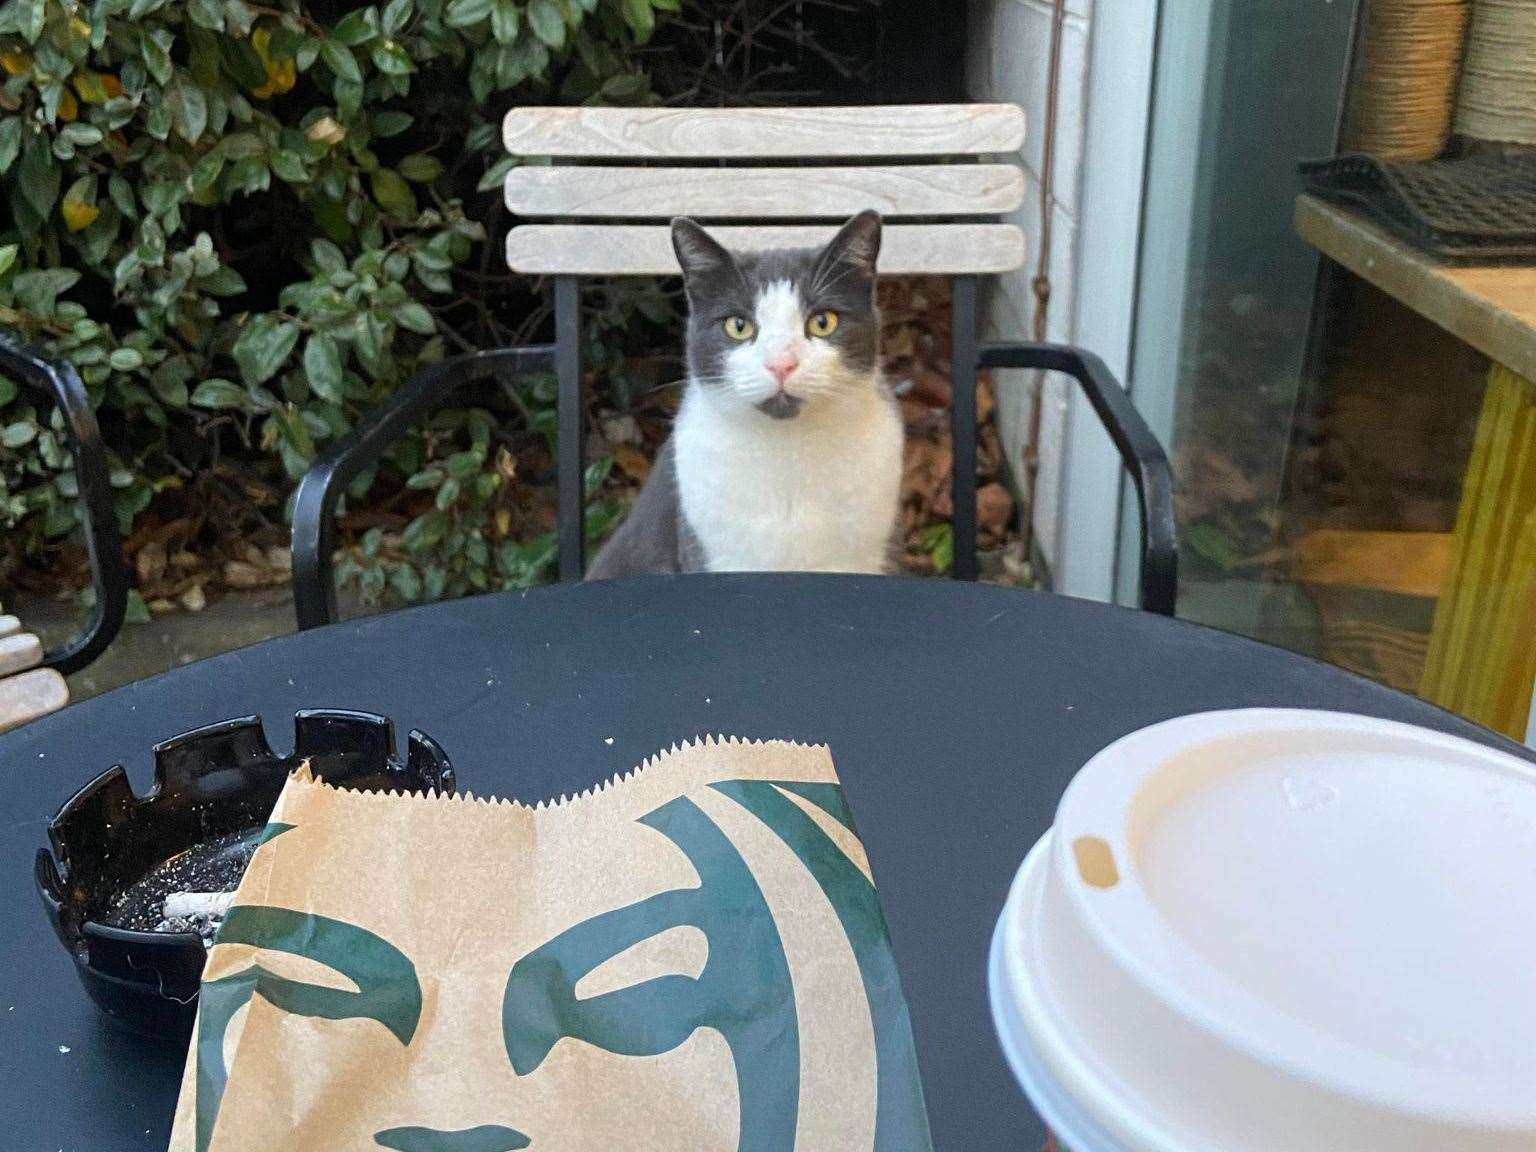 Many Starbucks customers have enjoyed Griffin joining them for a coffee. Picture: Cameron Burton